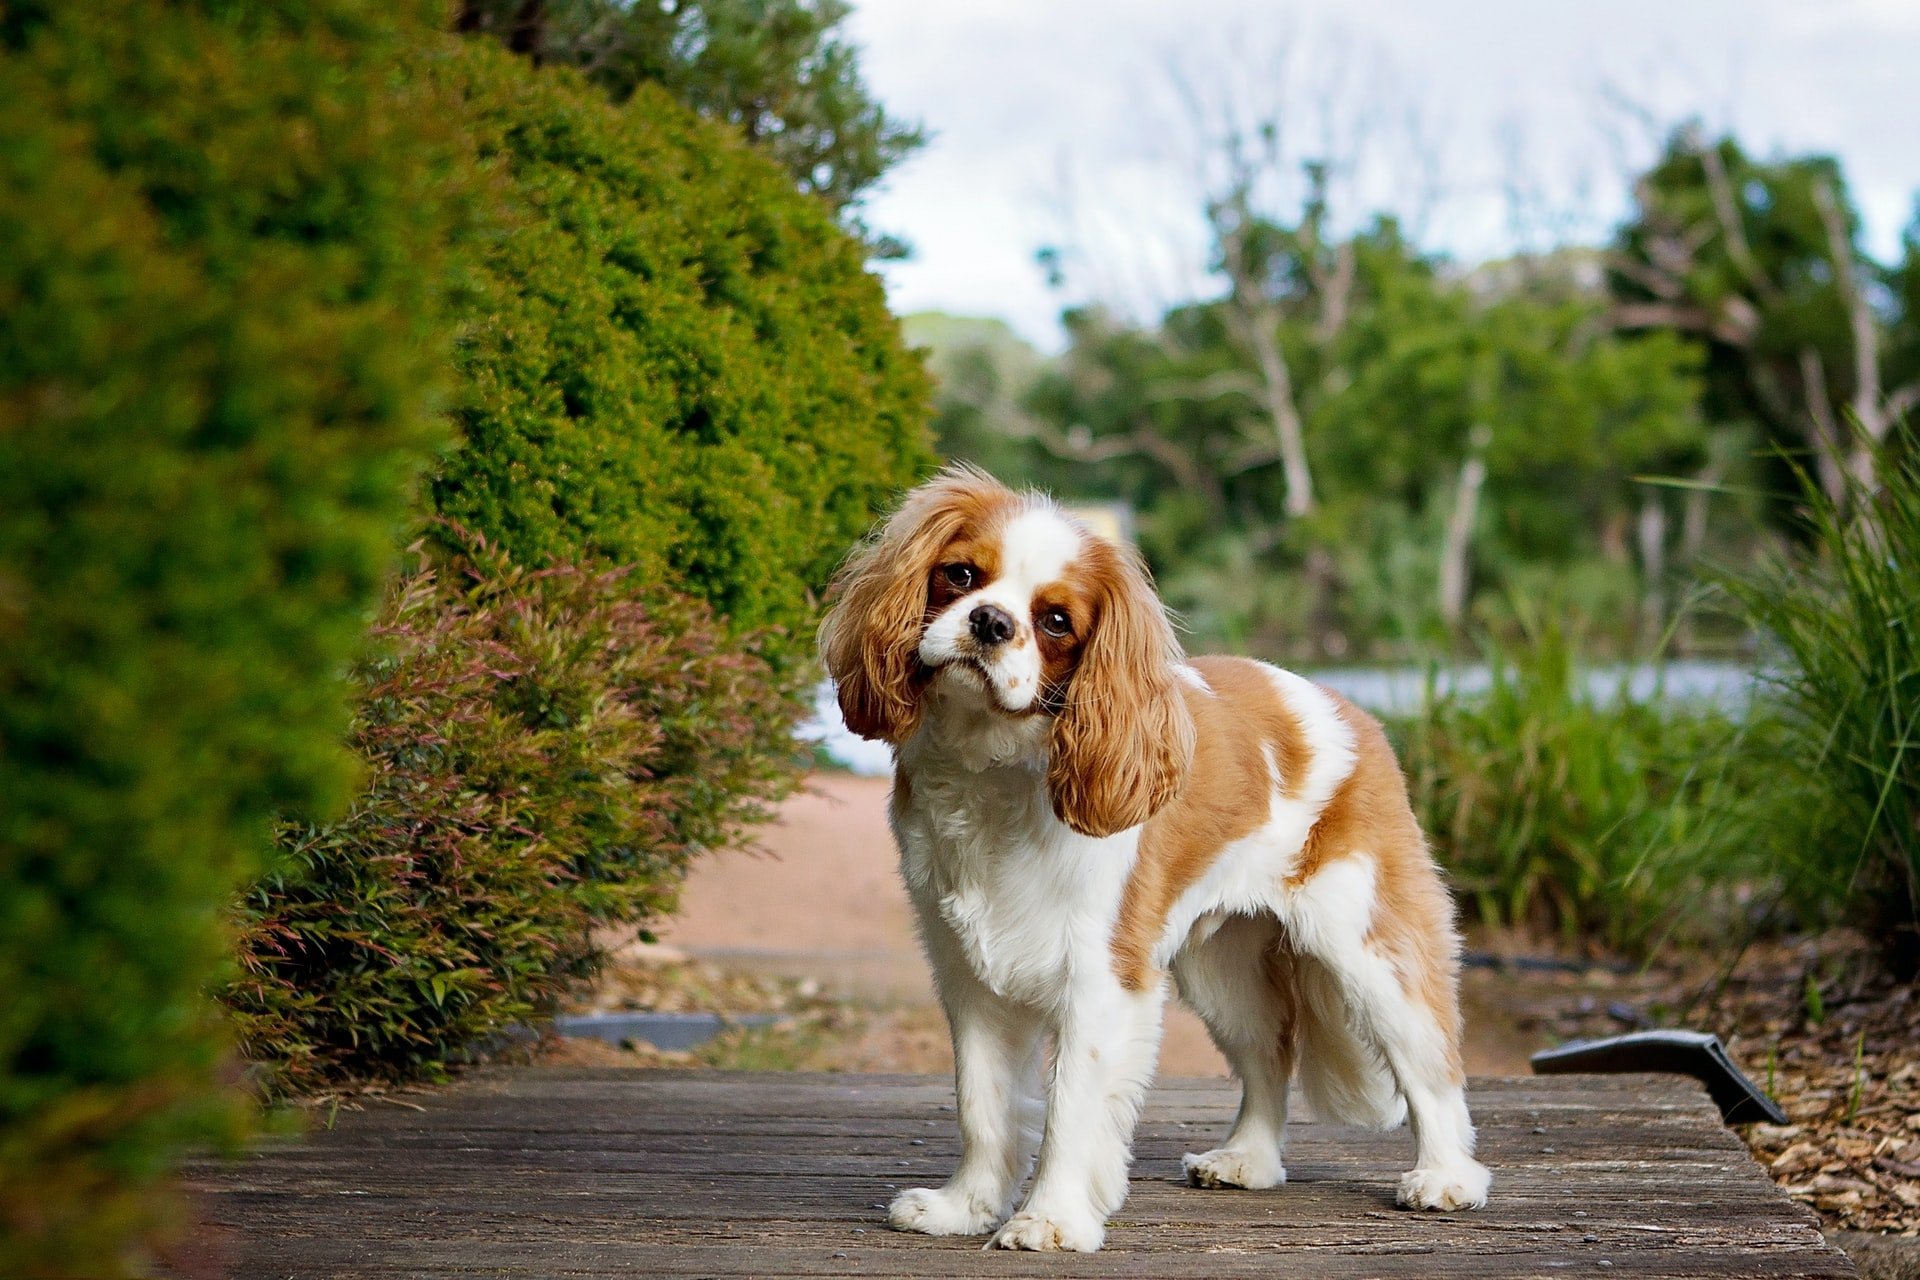 Cavalier King Charles spaniel standing on a wooden path cocking its head